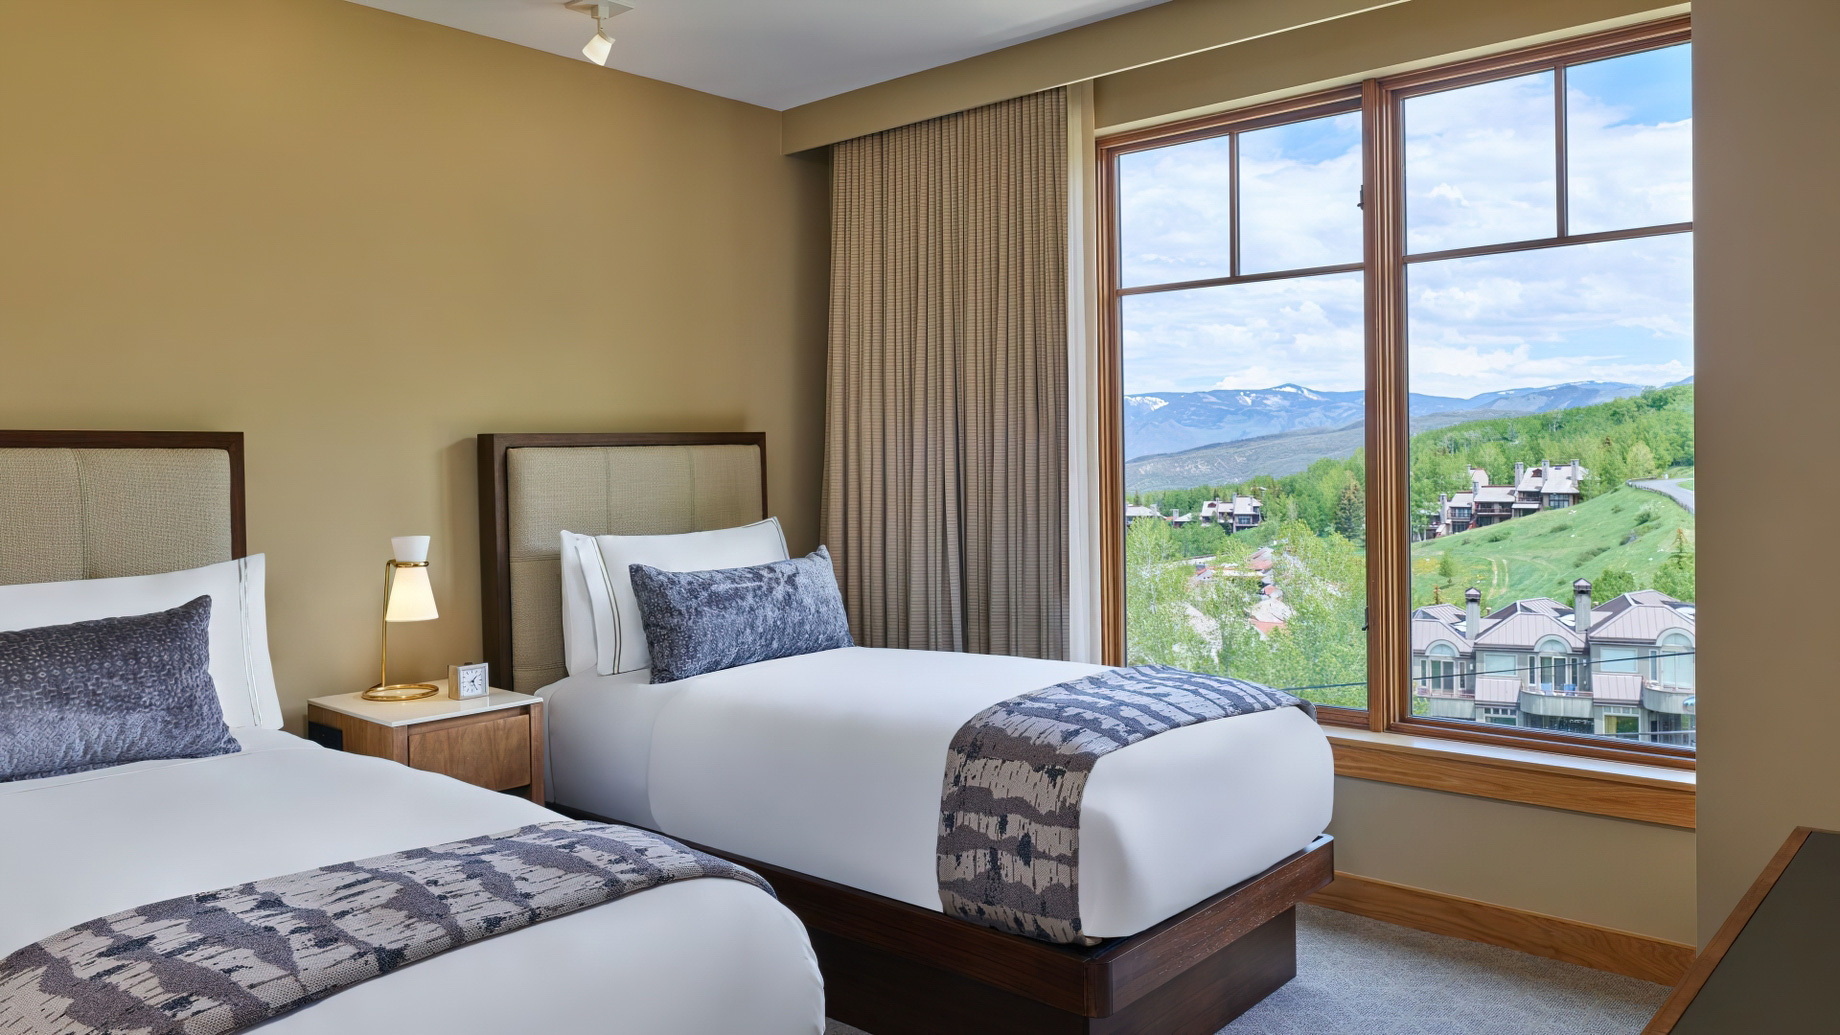 Viceroy Snowmass Luxury Resort – Aspen Snowmass Village, CO, USA – Two Bedroom Residence Bedroom View